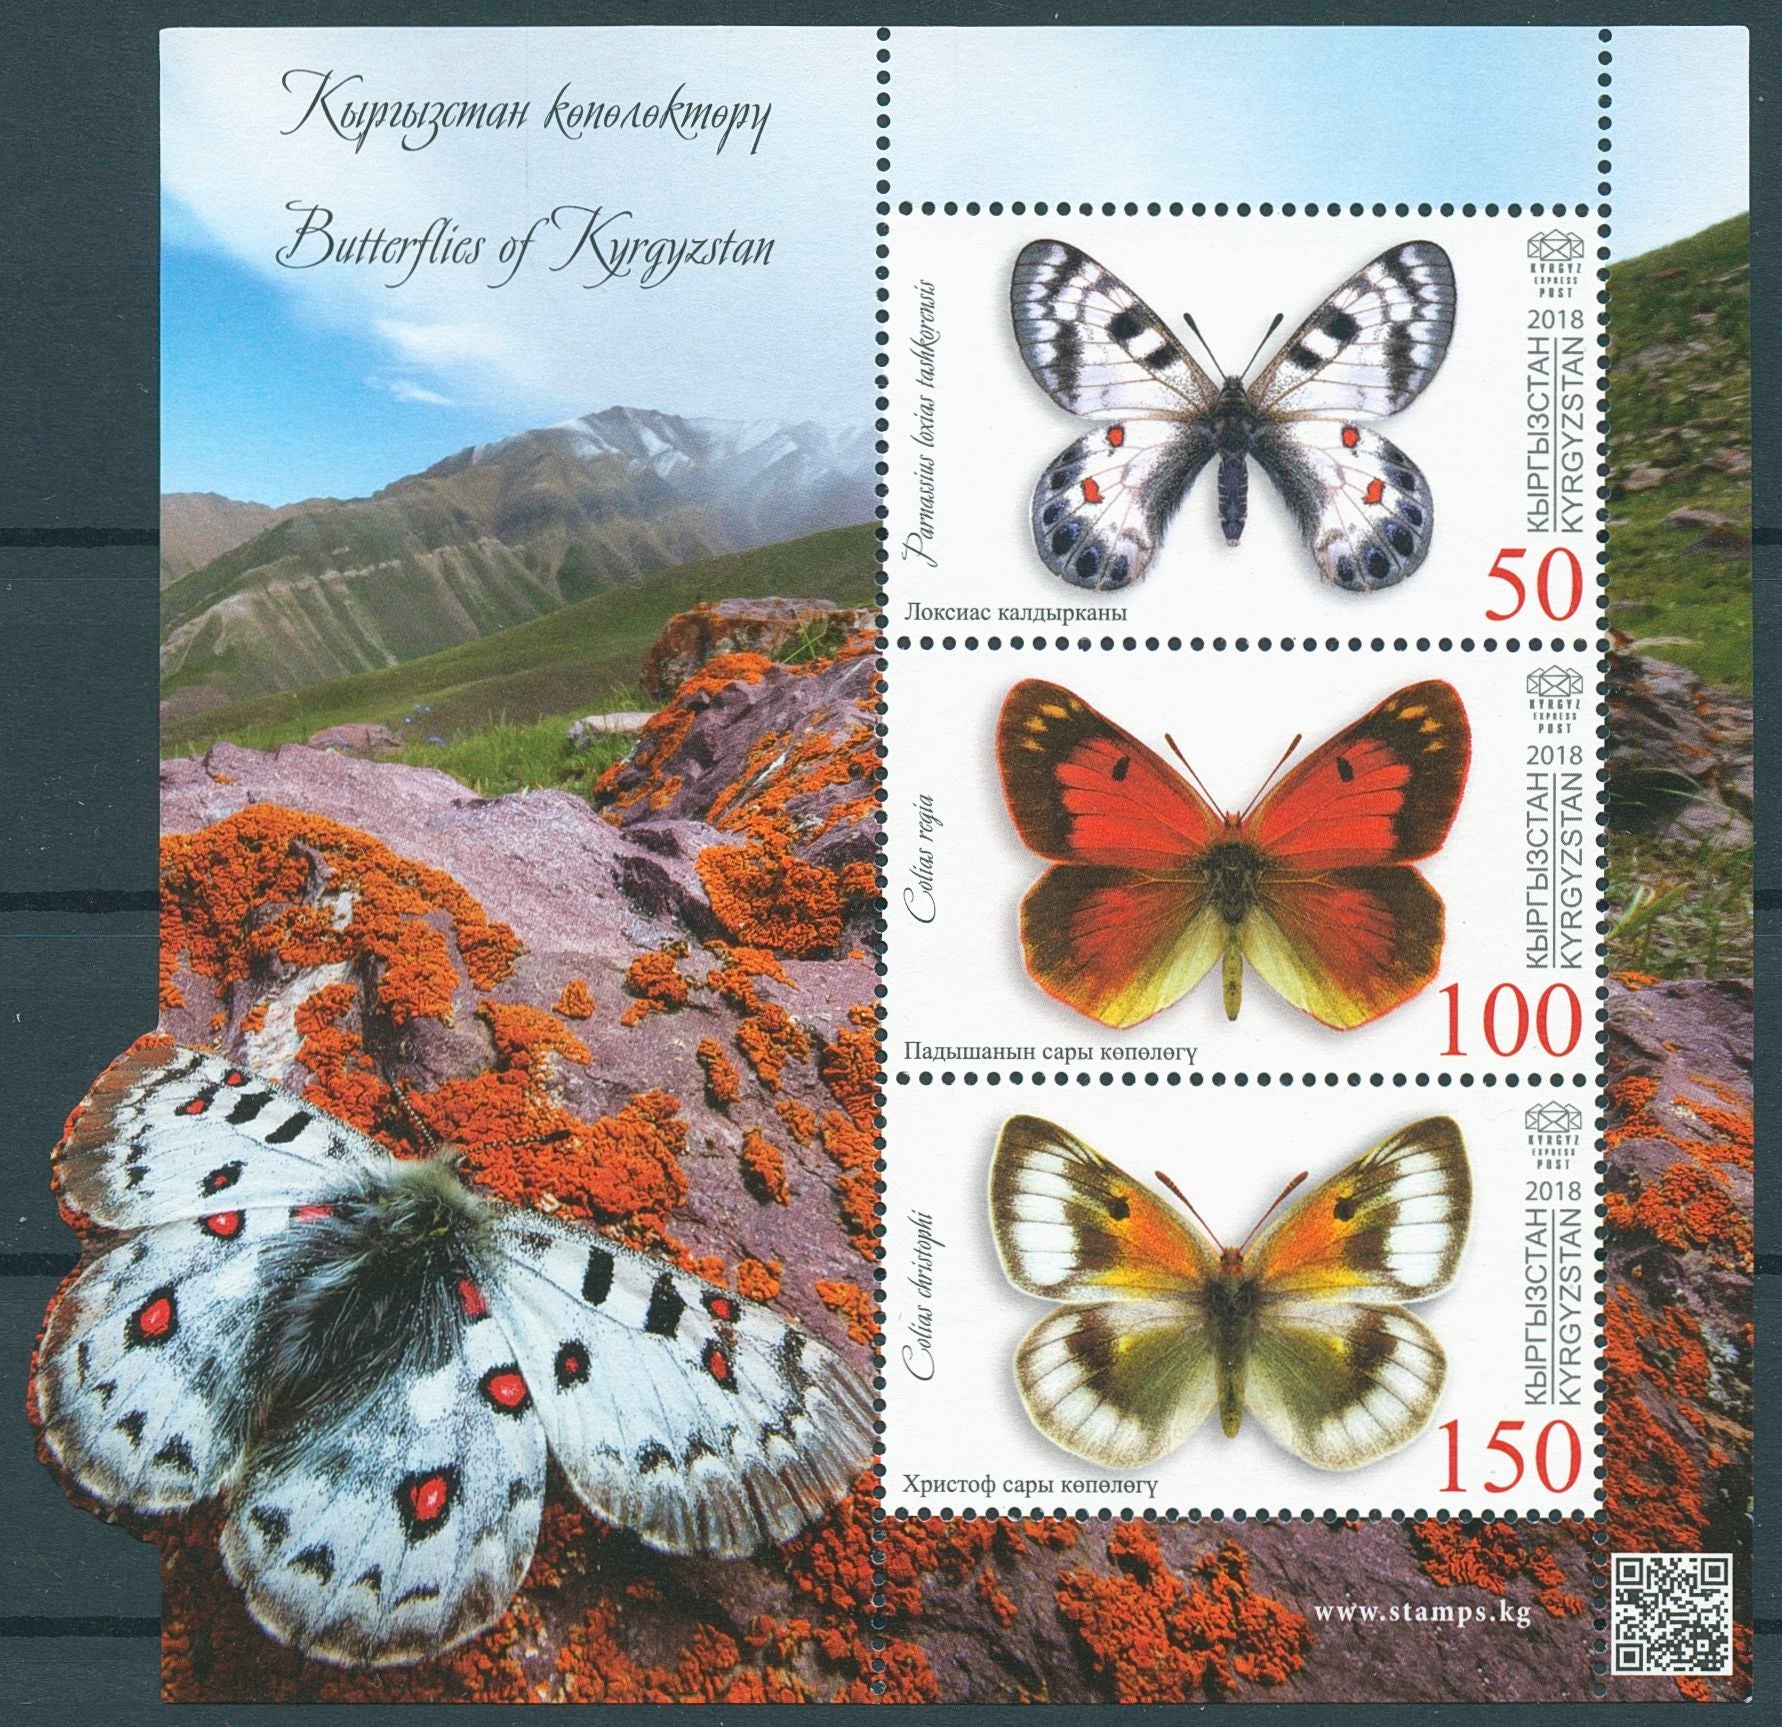 Kyrgyzstan KEP 2018 MNH Butterflies 3v M/S Butterfly Insects Stamps